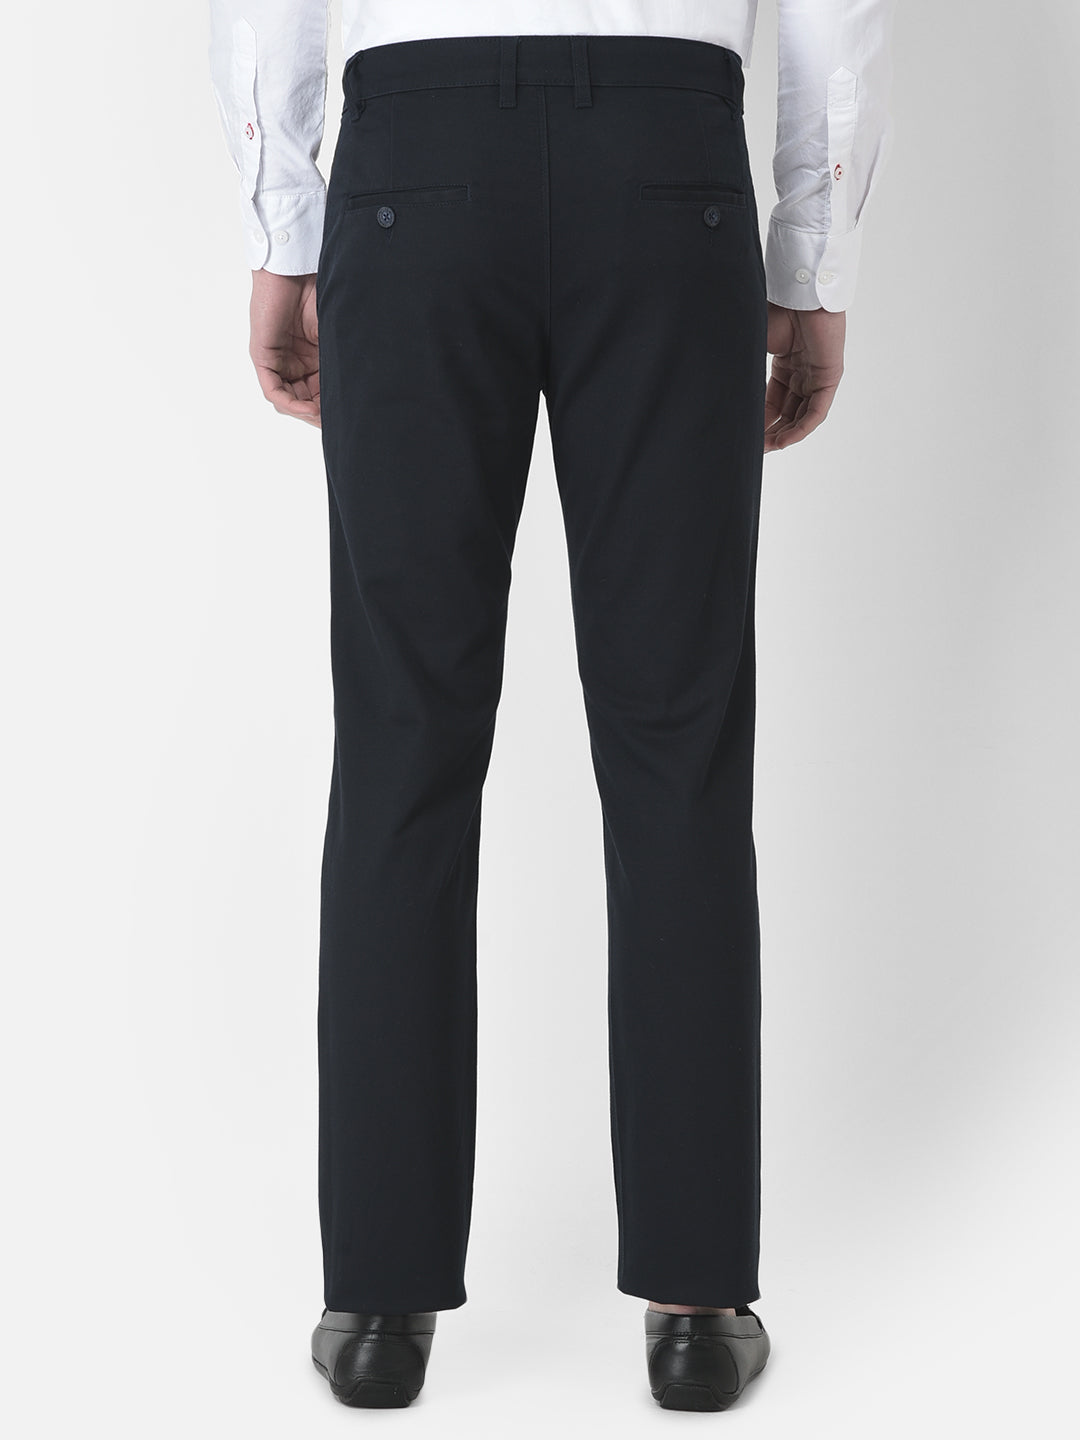  Navy Blue Chino Trousers 